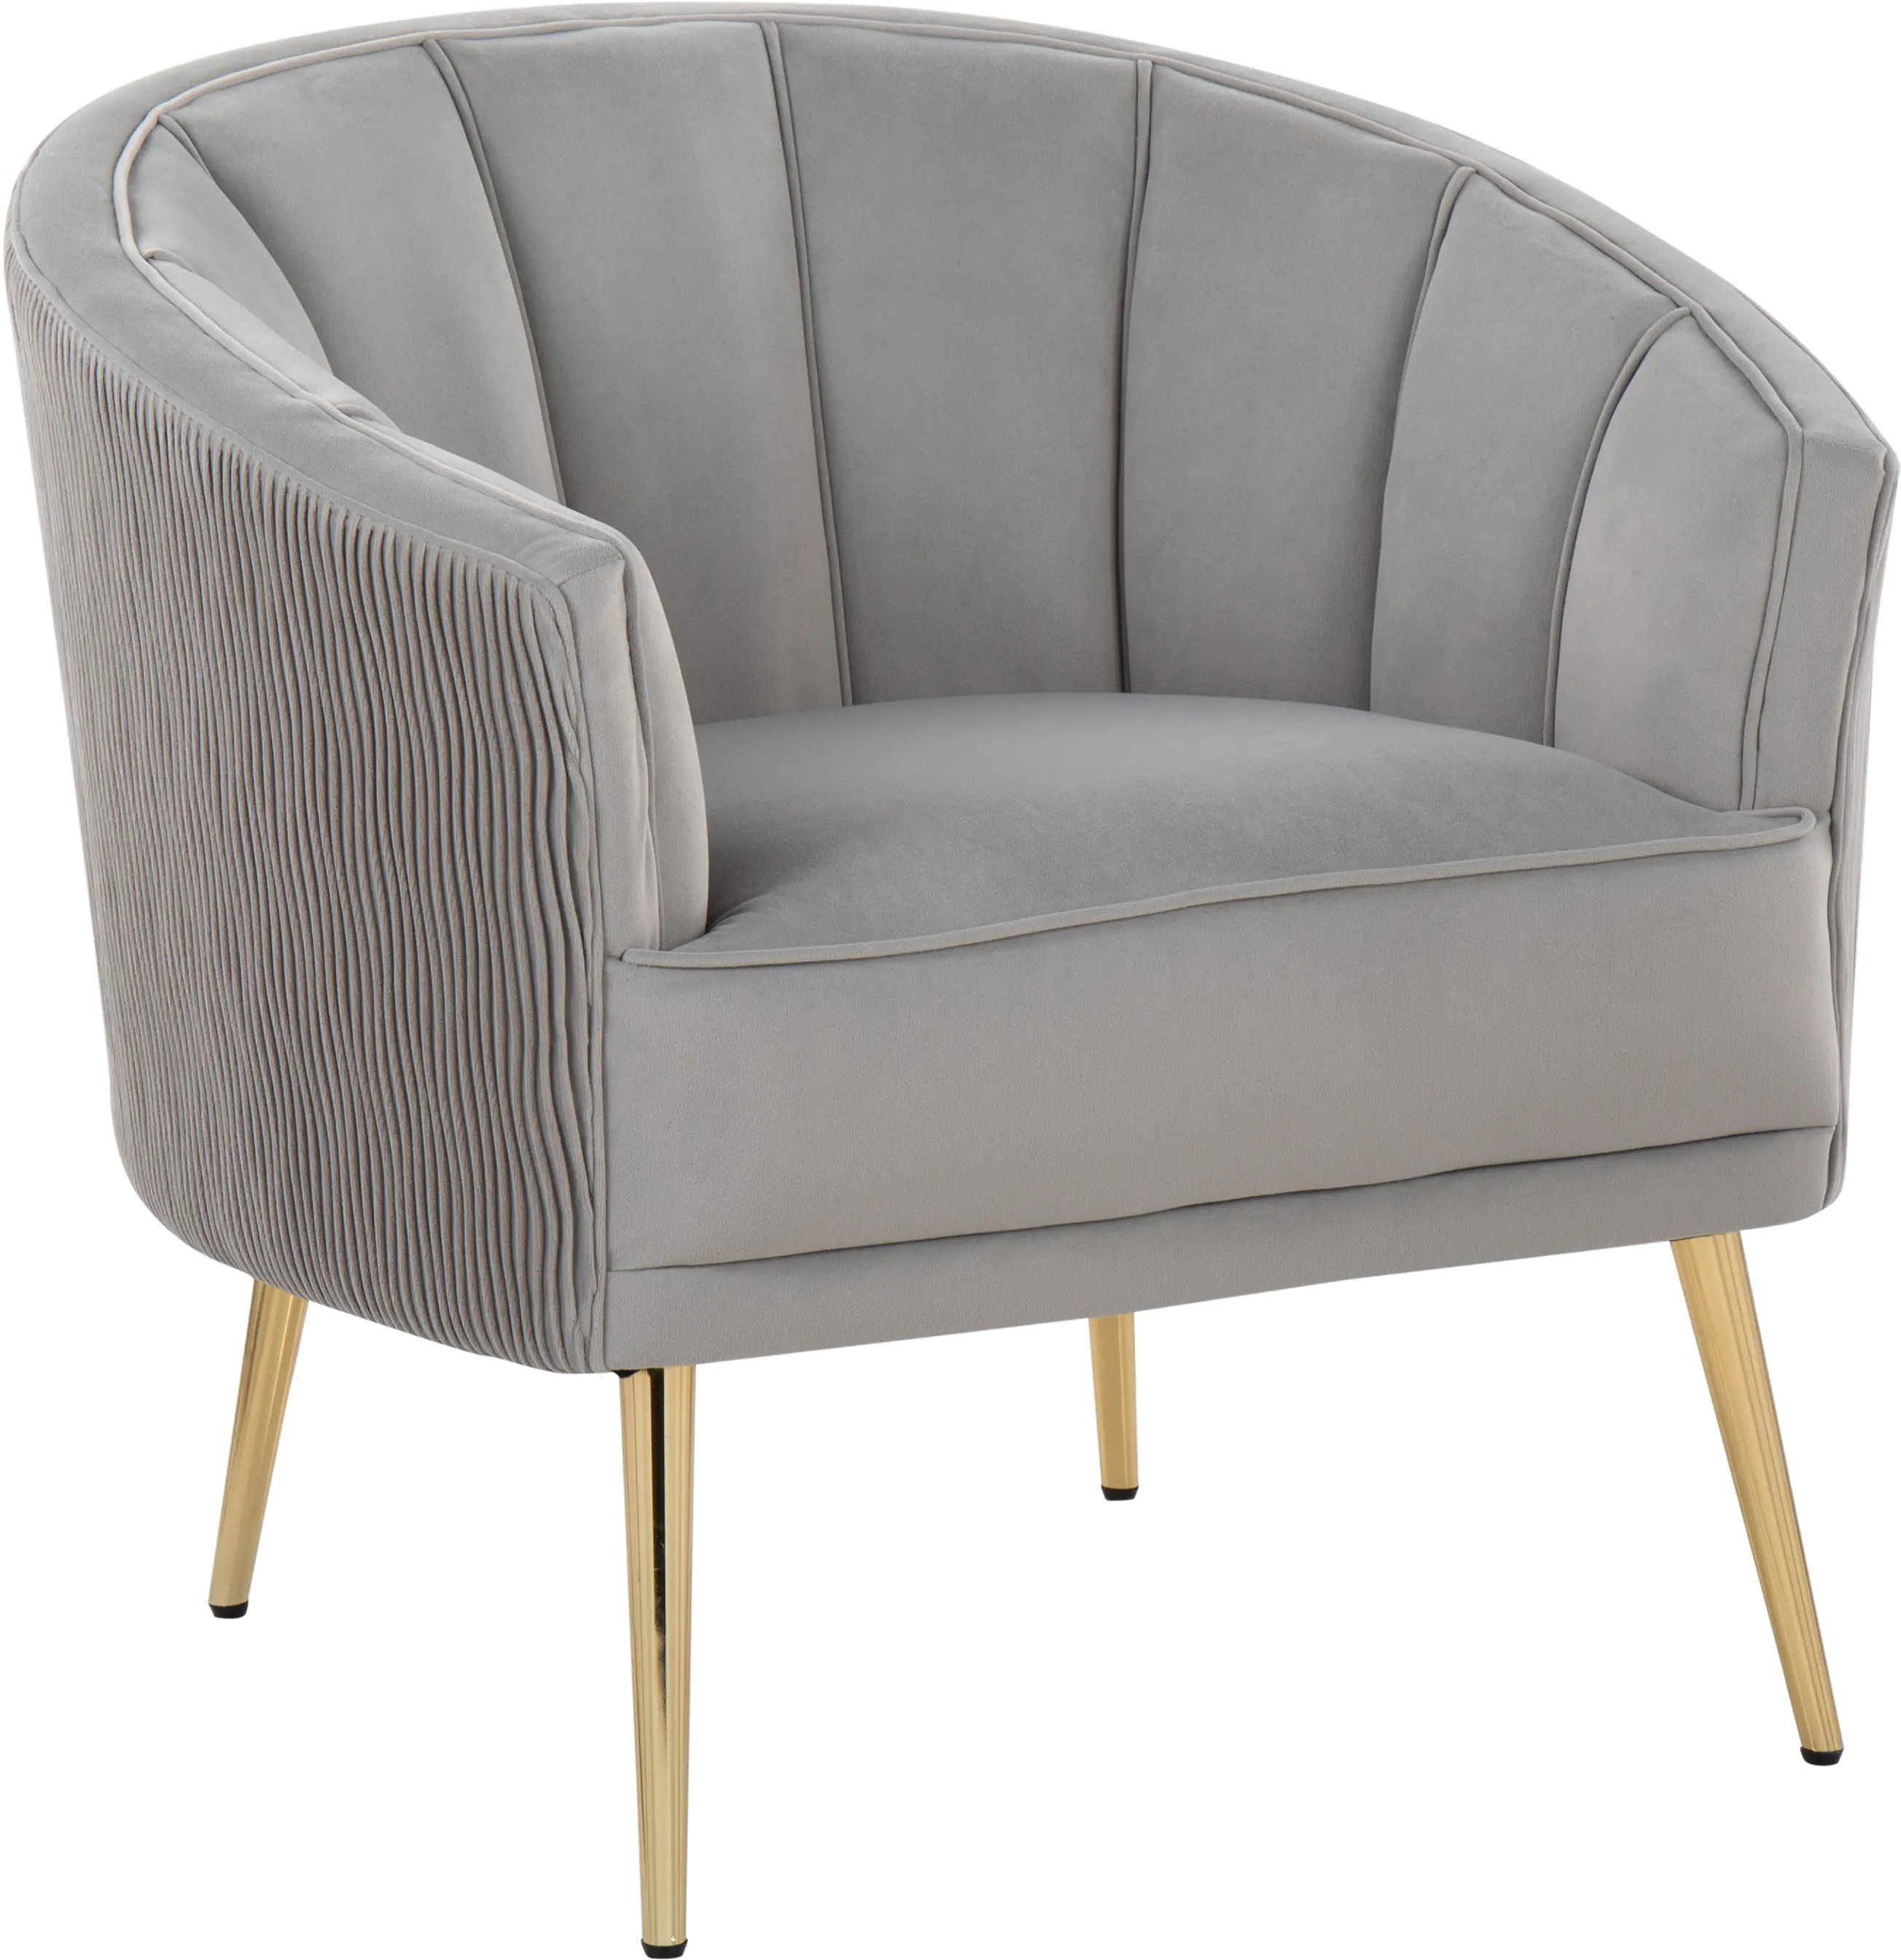 CHR-TANIAPLTWVAUVSV Tania Silver Pleated Waves Glam Accent Chair sku CHR-TANIAPLTWVAUVSV